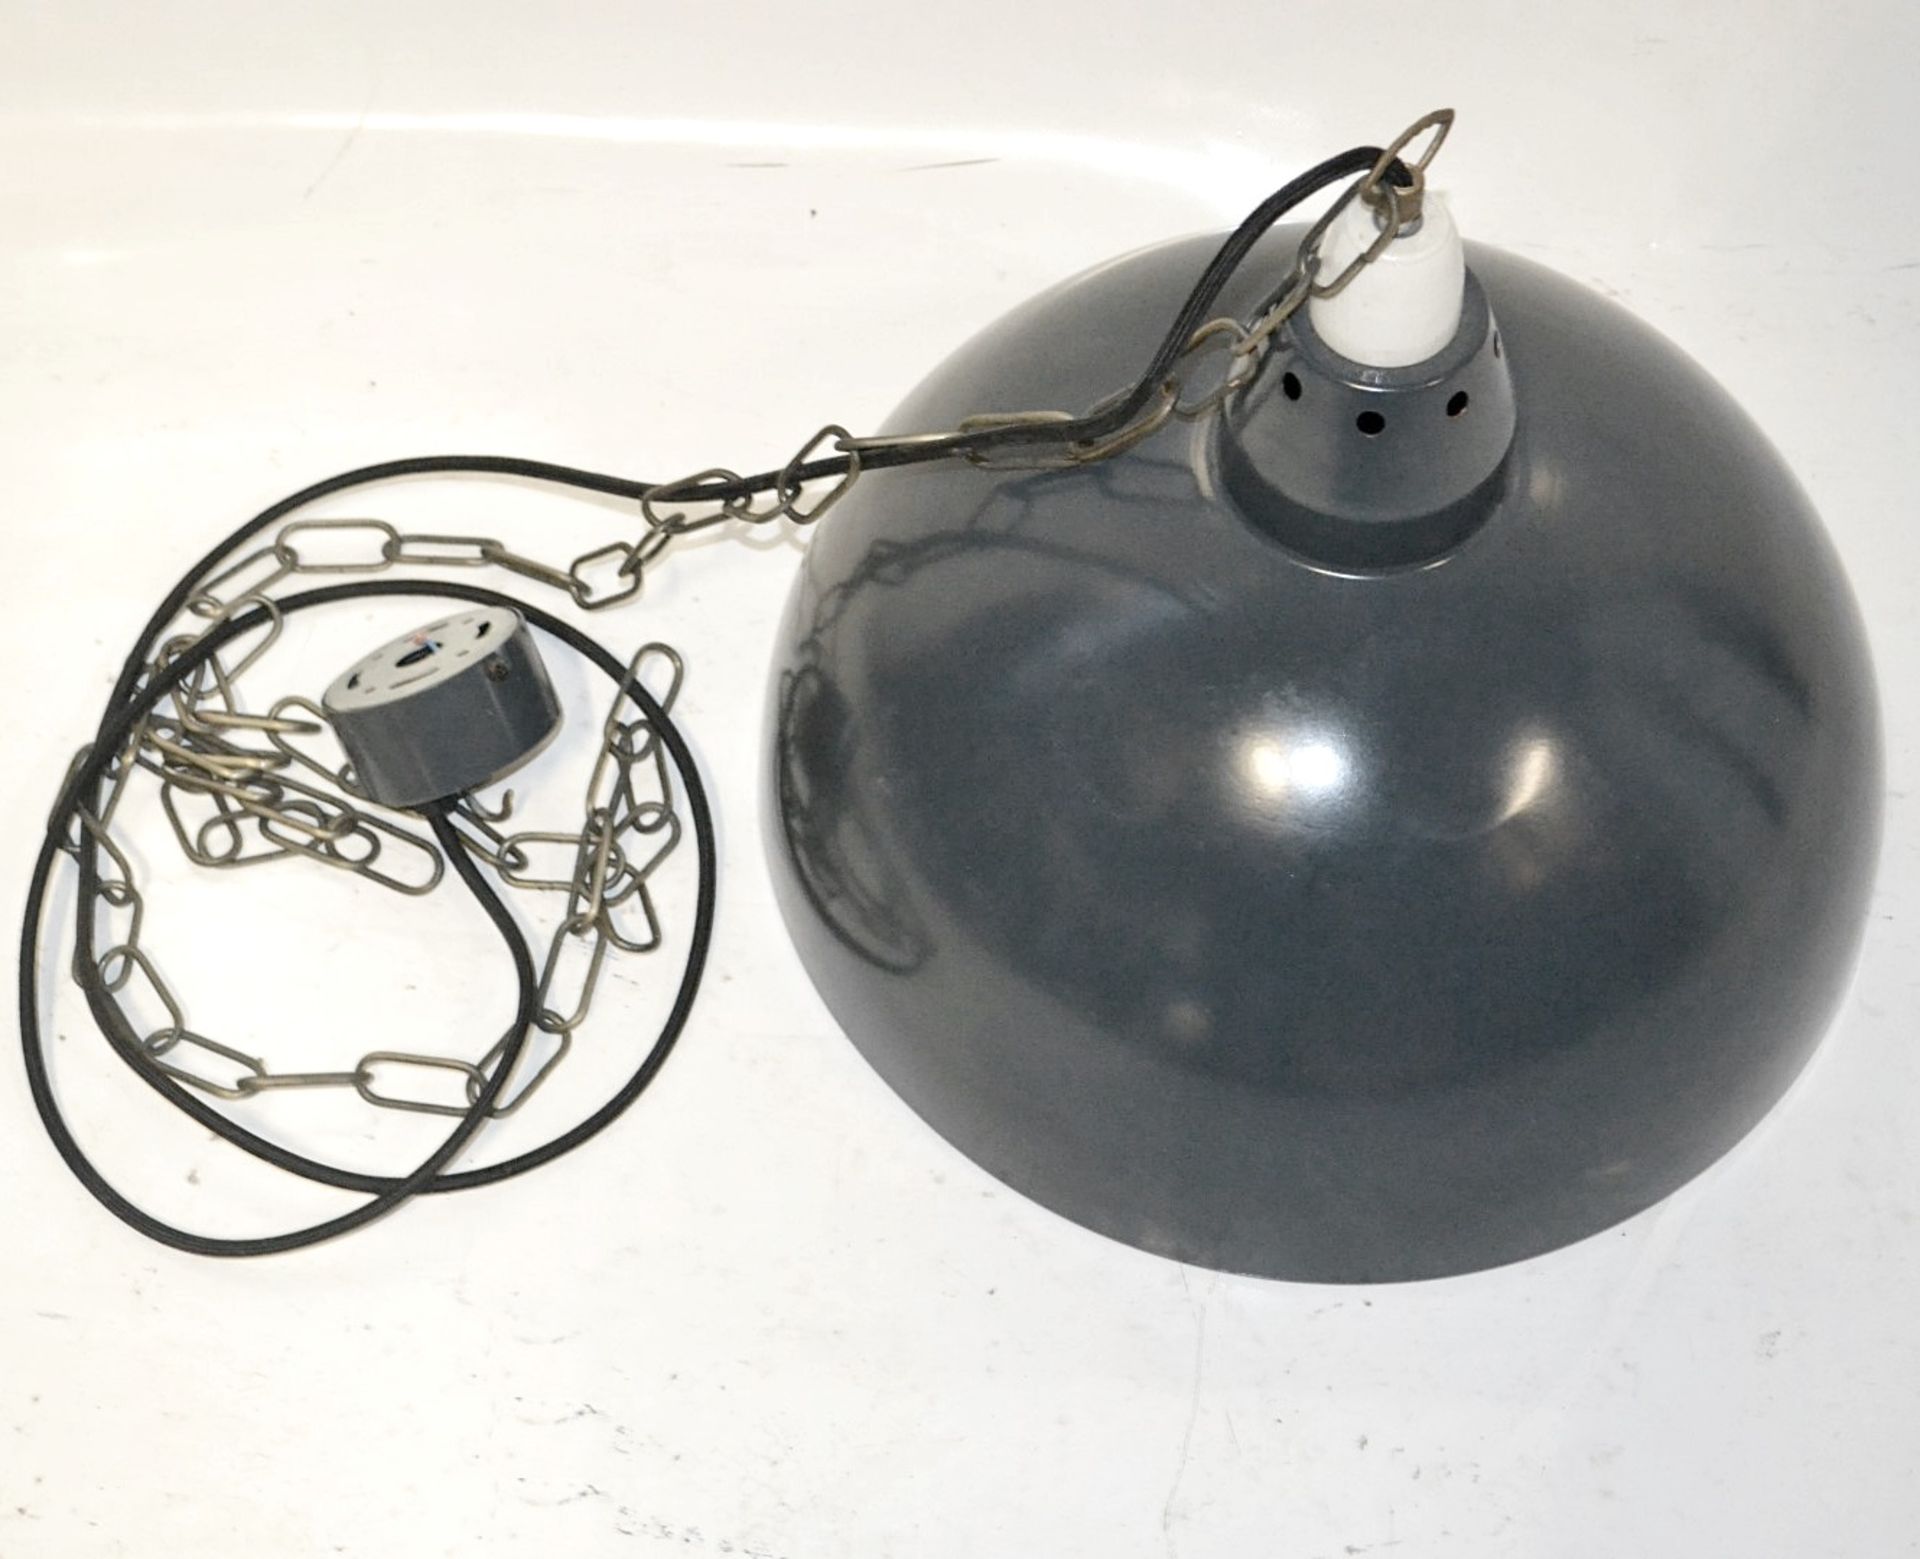 5 x Dome Pendant Ceiling Light Fittings With Chain And Black Fabric Flex - CL353 - Image 3 of 6